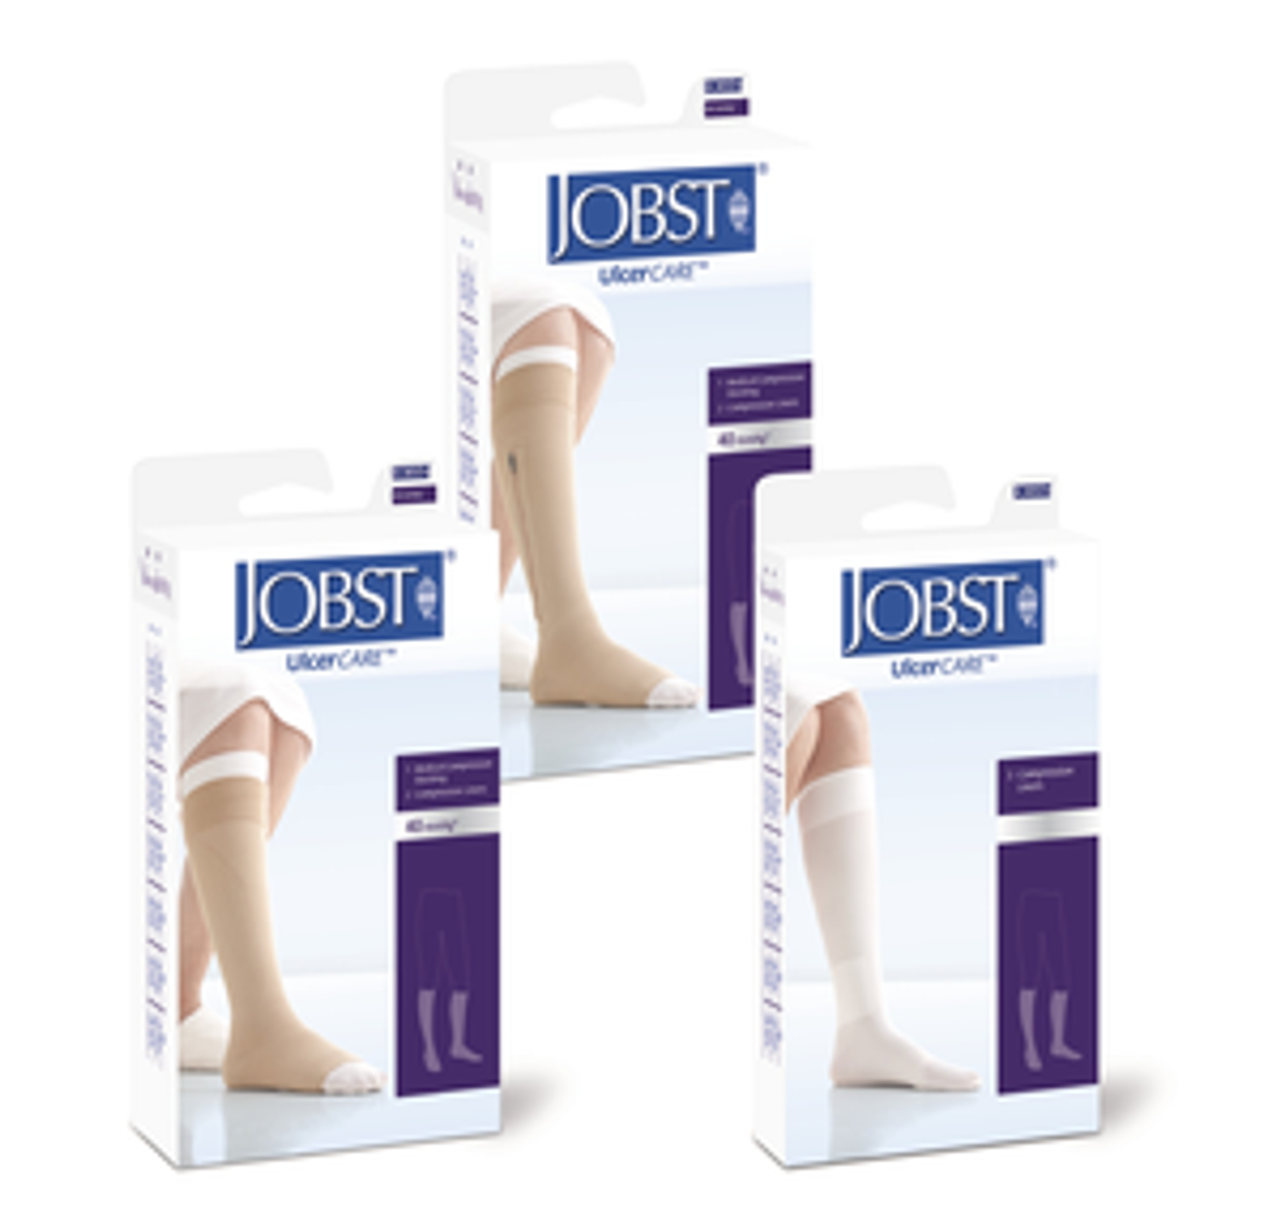 BSN-7363026 KT/1 JOBST ULCERCARE READY-TO-WEAR 3XL, NO ZIPPER, BEIGE (INCL 1 STOCKING AND 2 LINERS)